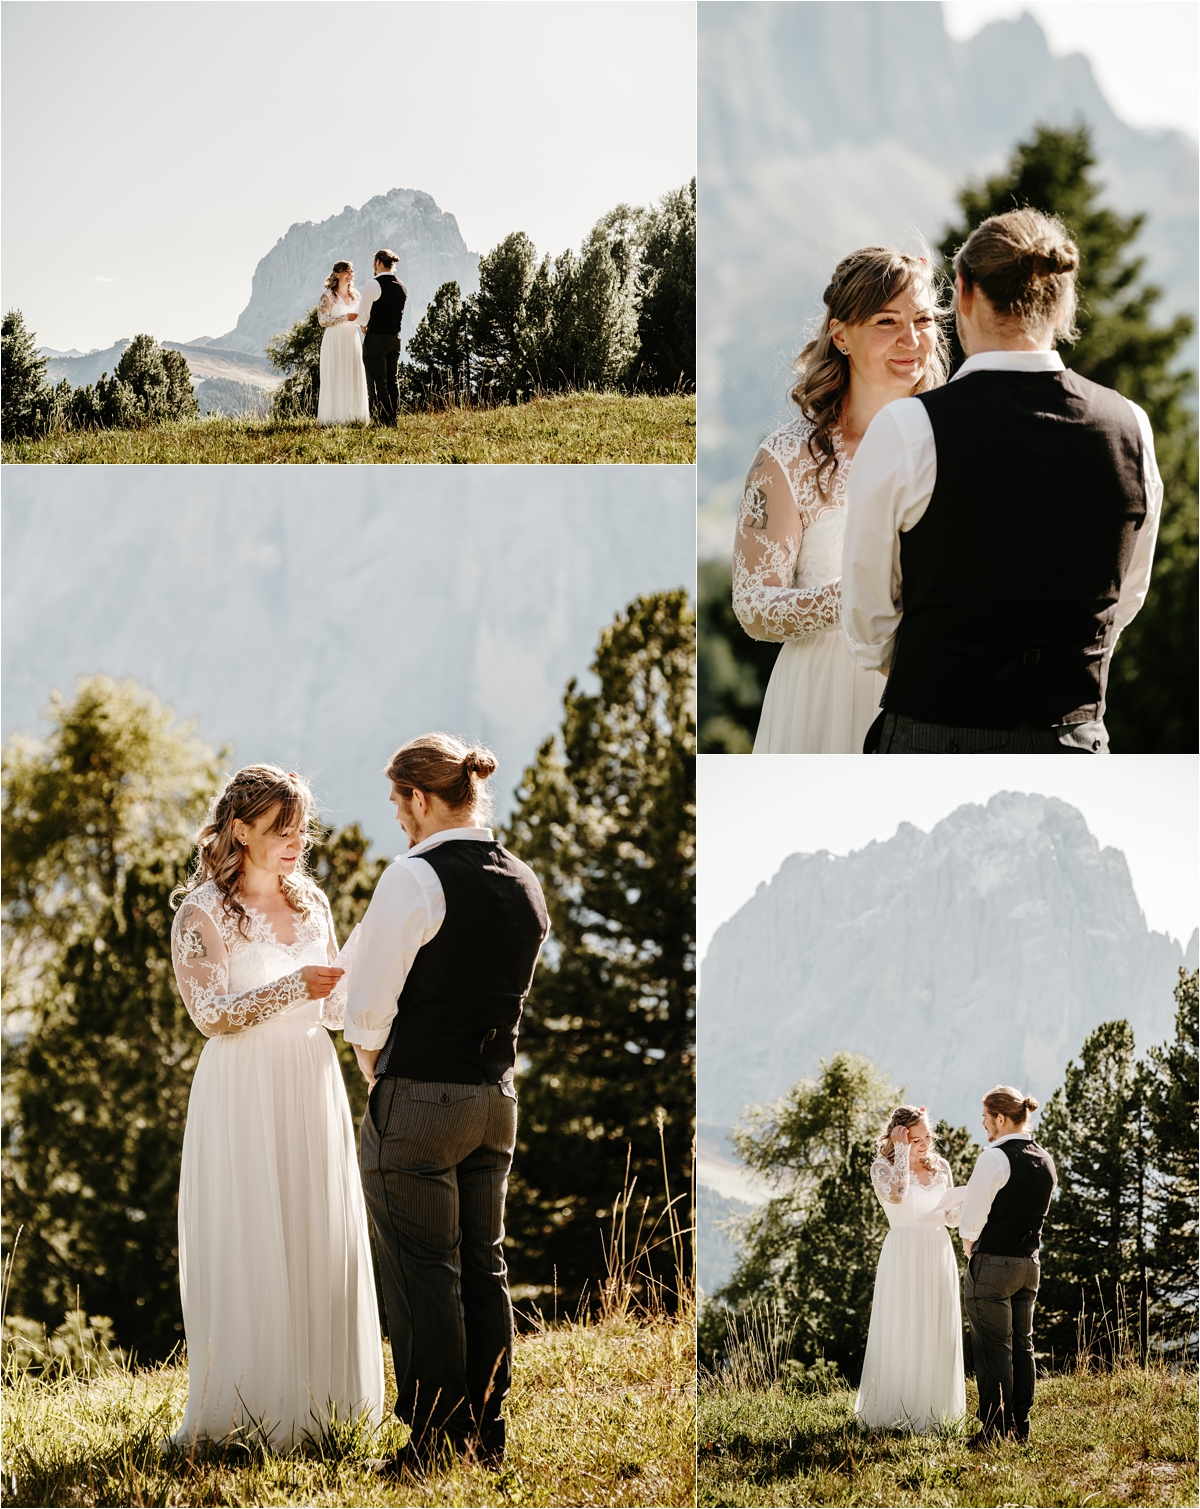 Alpe di Siusi elopement in the Dolomites. Photos by Wild Connections Photography